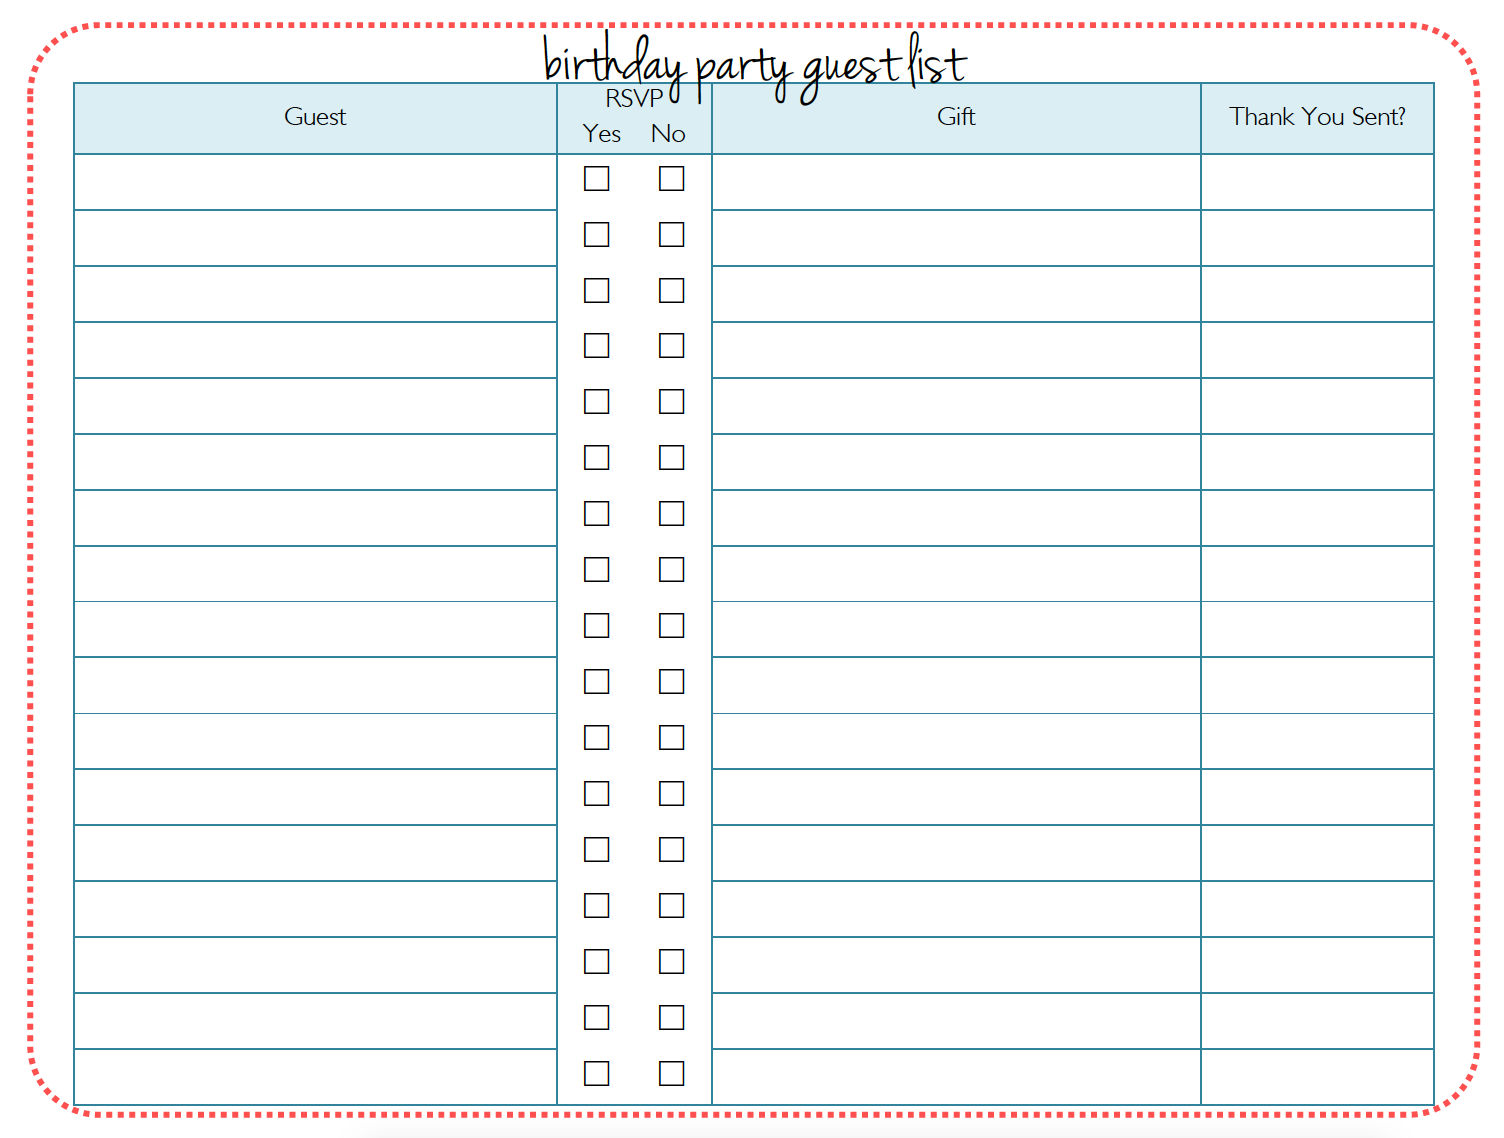 Party Rsvp List Template – Unique Birthday Party Ideas And Themes - Free Printable Birthday Guest List